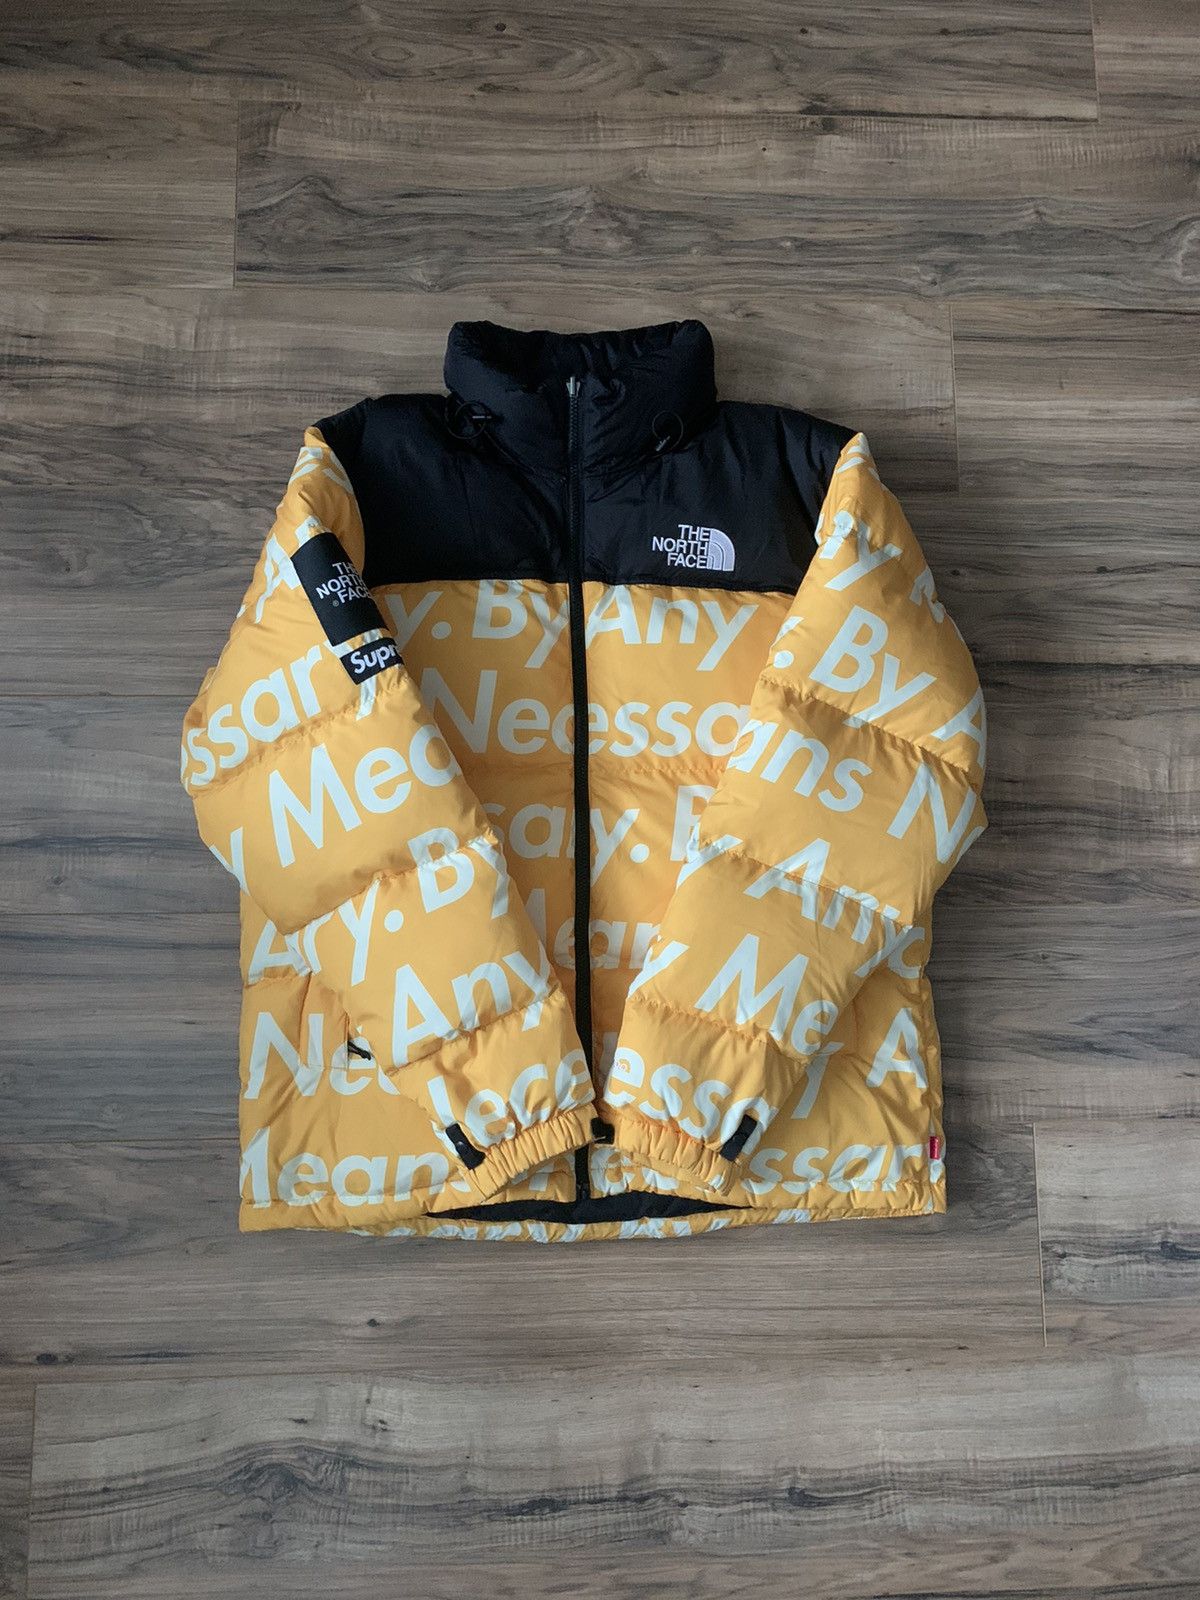 Supreme x The North Face By Any Means Nuptse Jacket